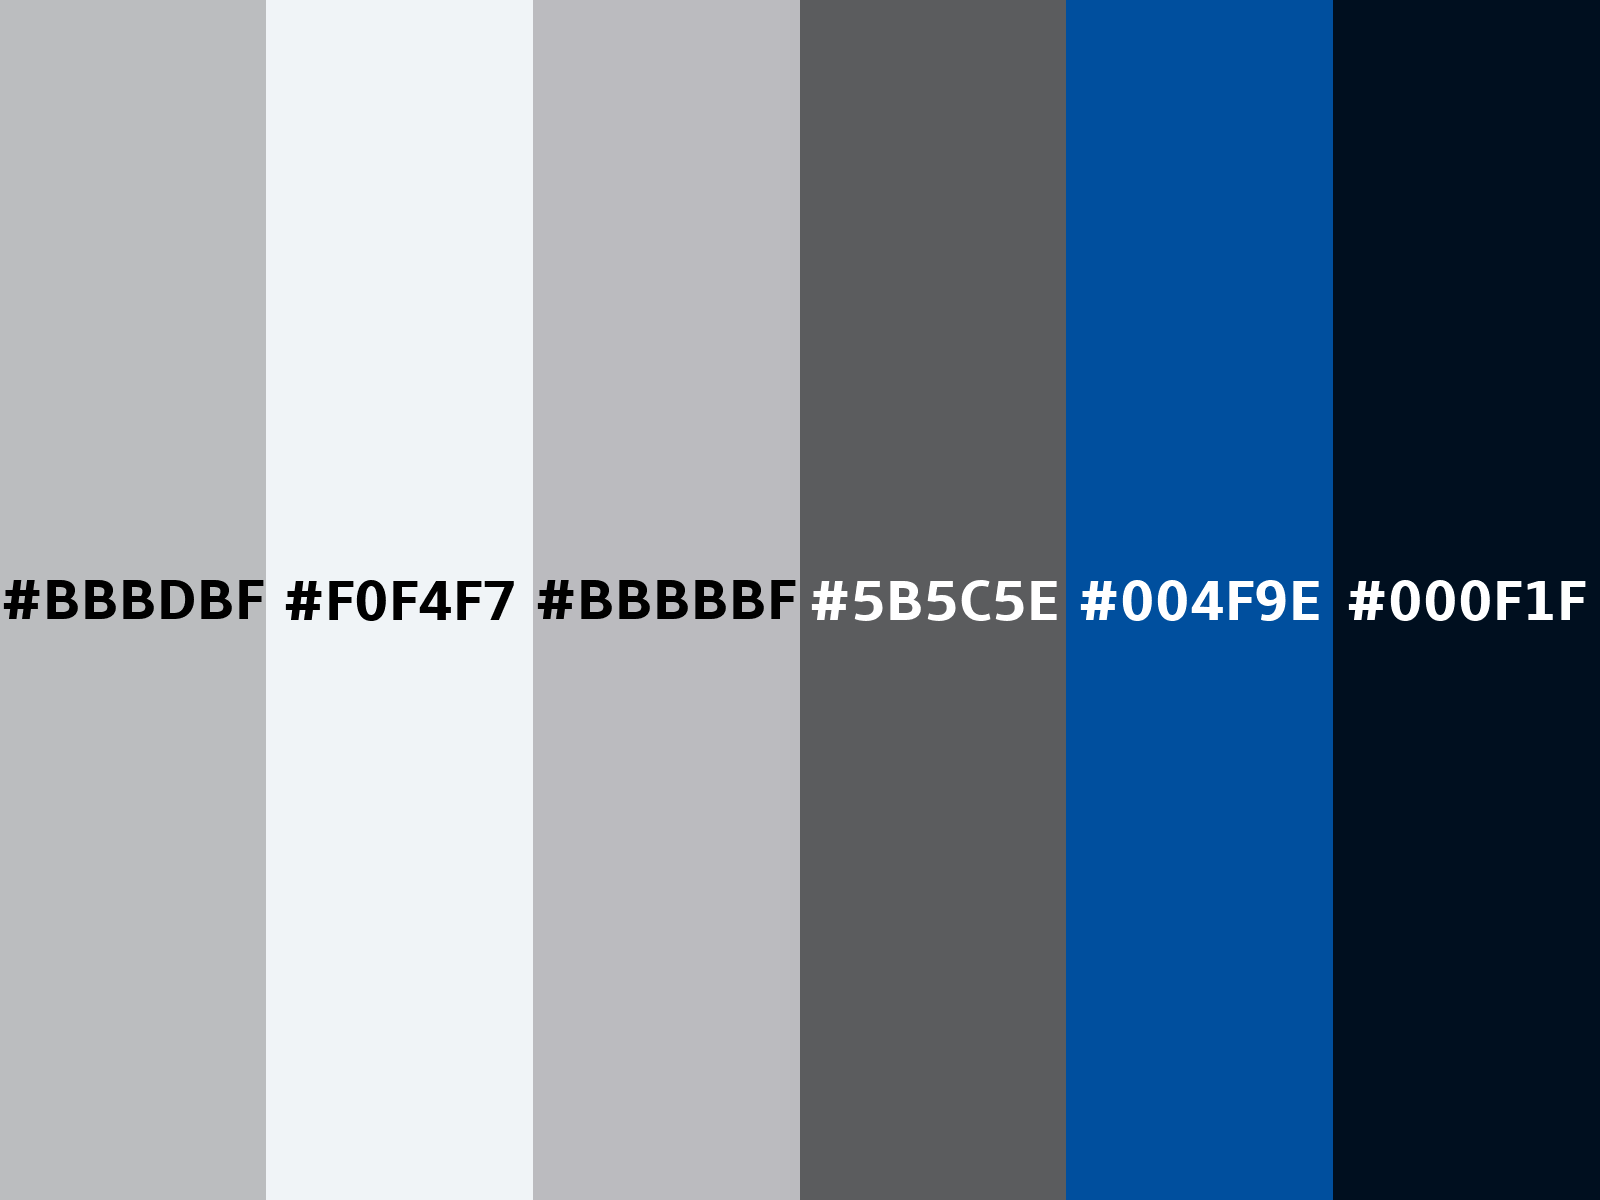 Soft Gray color hex code is #BBBDBD